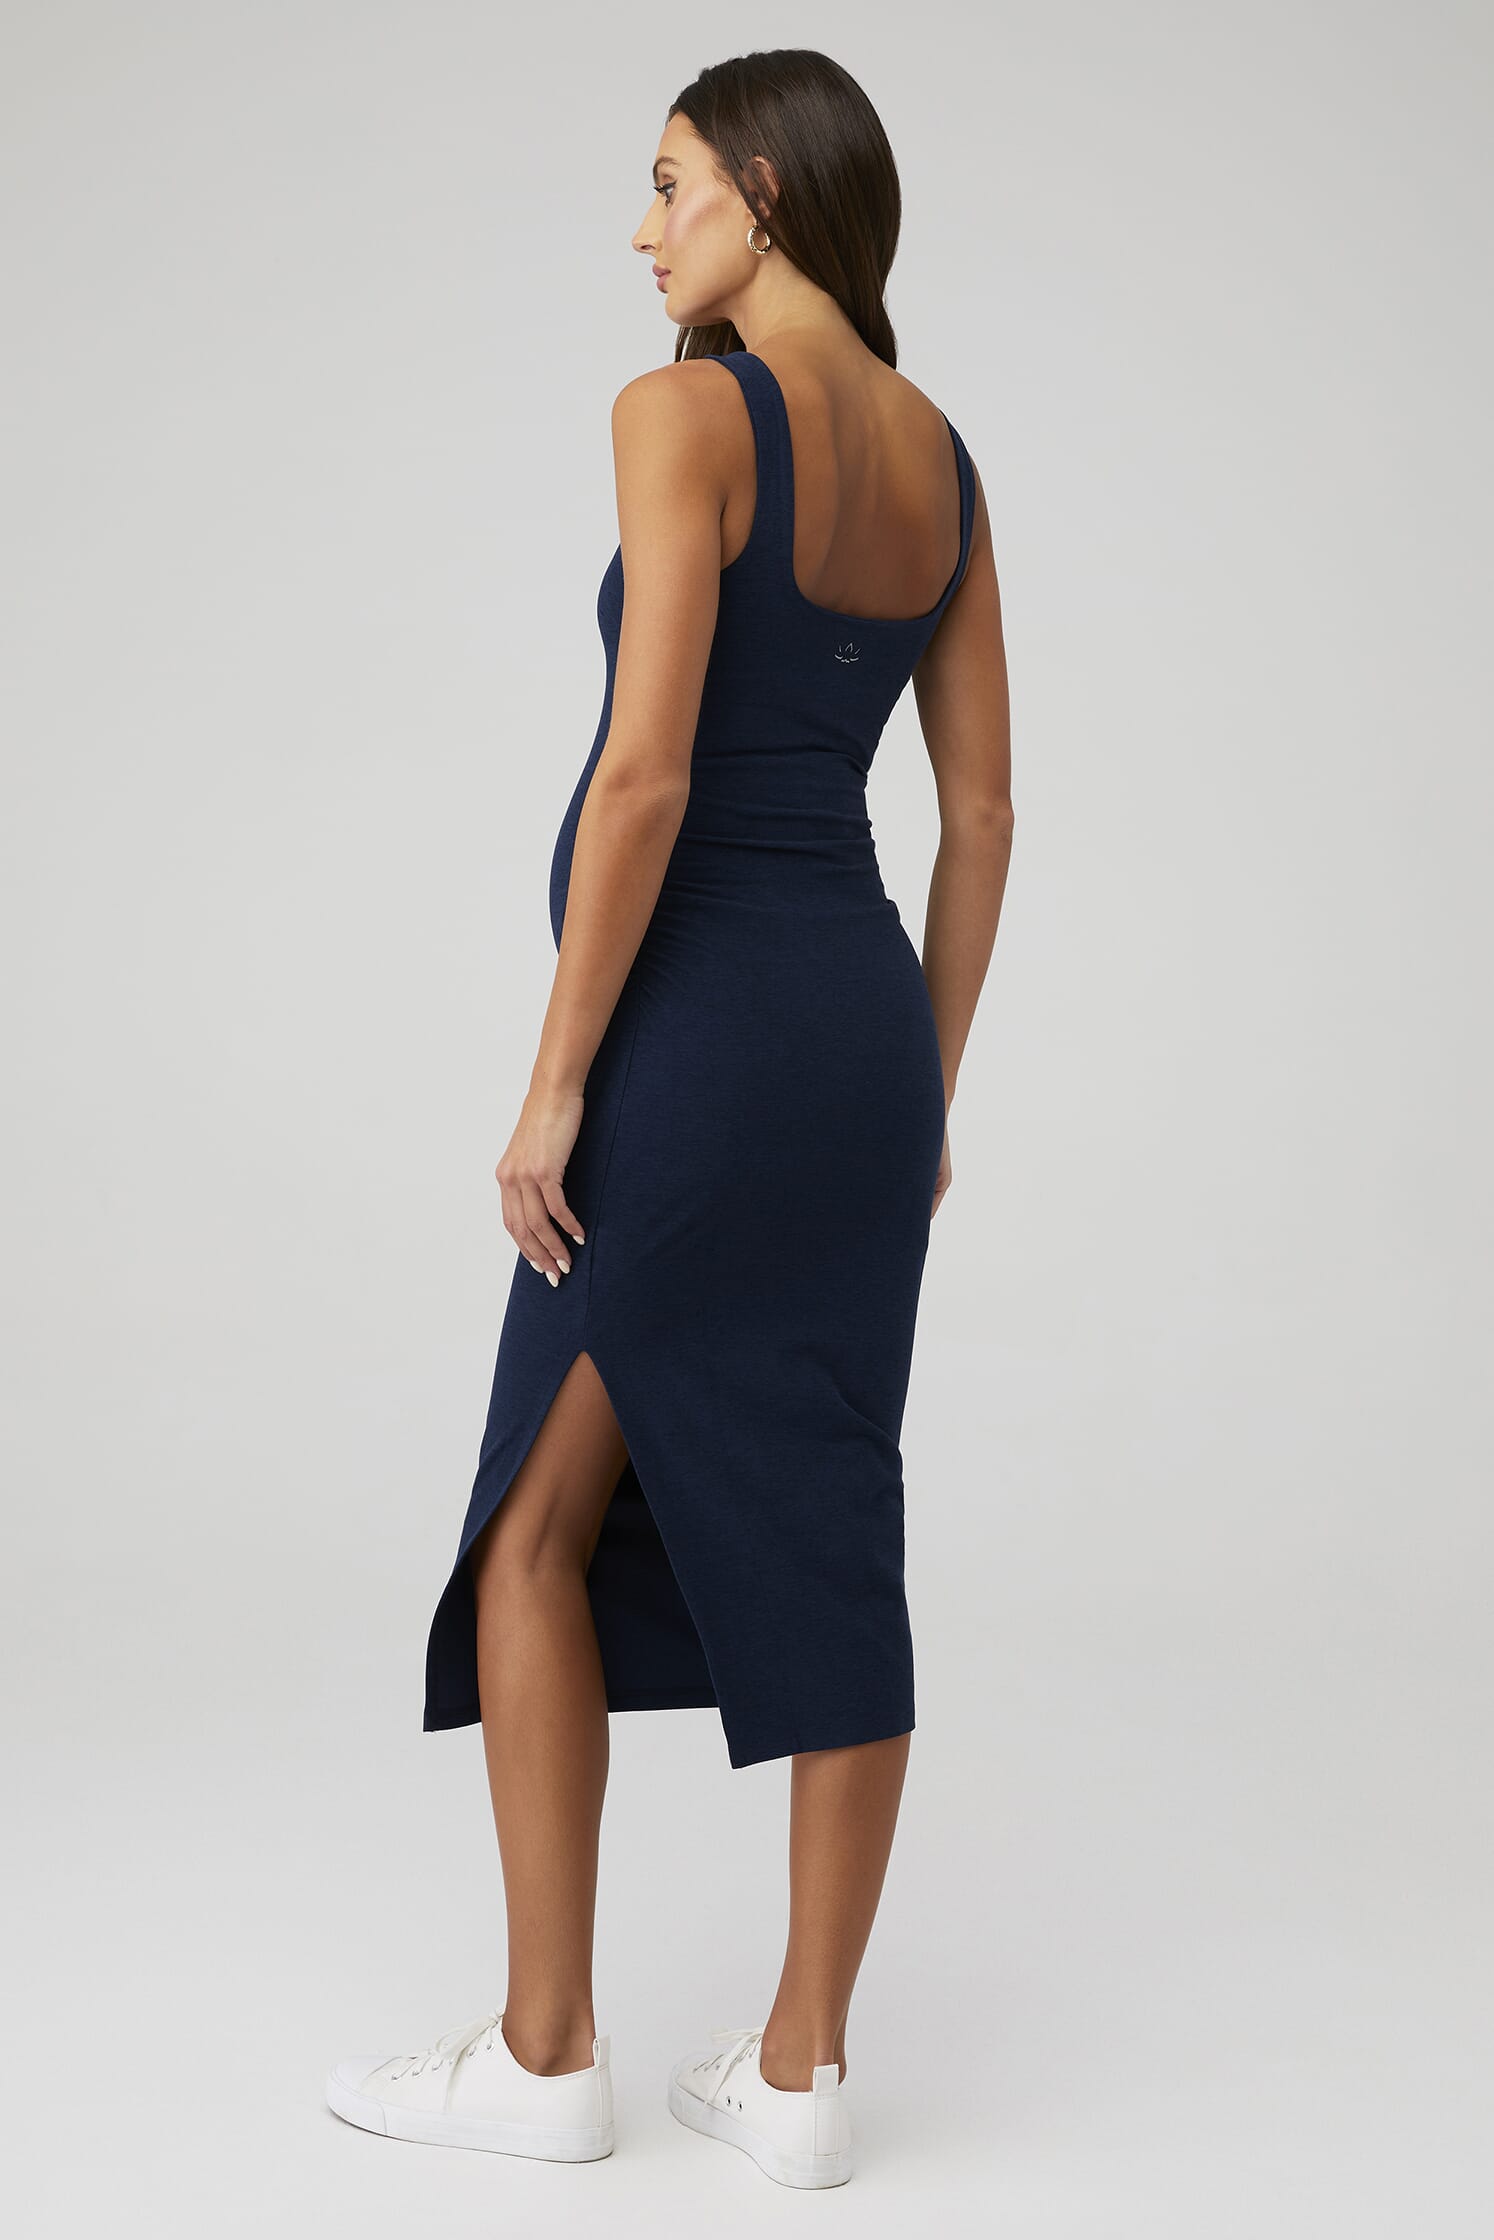 Beyond Yoga, Spacedye Icon Maternity Dress in Nocturnal Navy